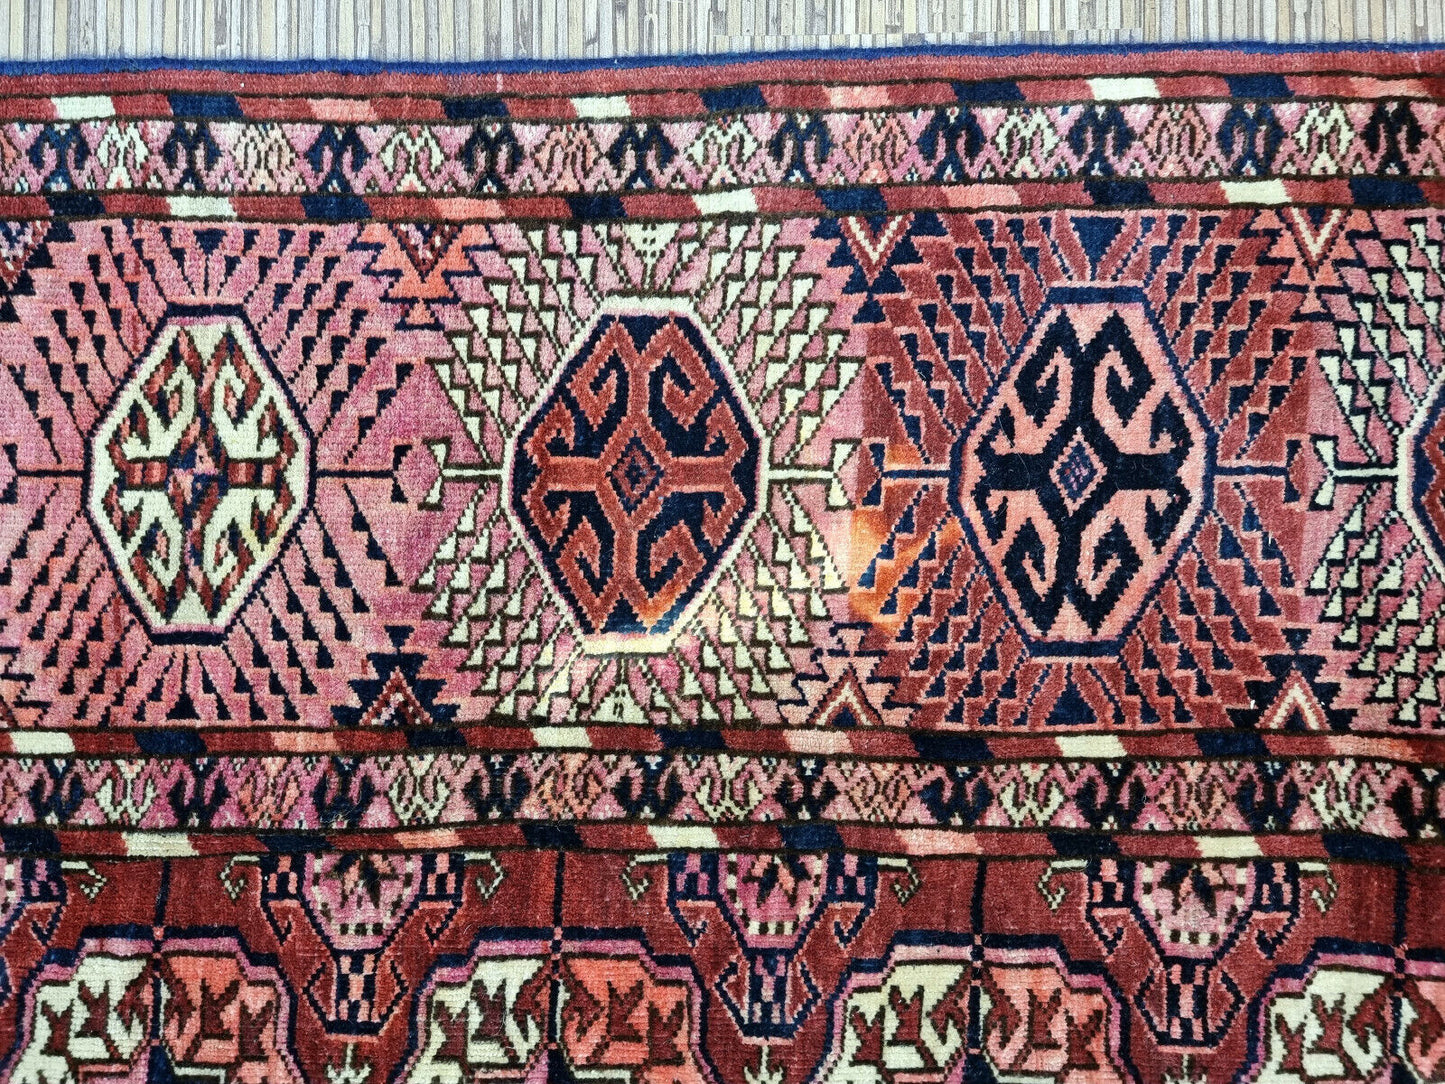 Close-up of traditional Turkmen motifs on Handmade Antique Turkmen Tekke Rug - Detailed view showcasing the intricate designs representing Turkmen culture and heritage.